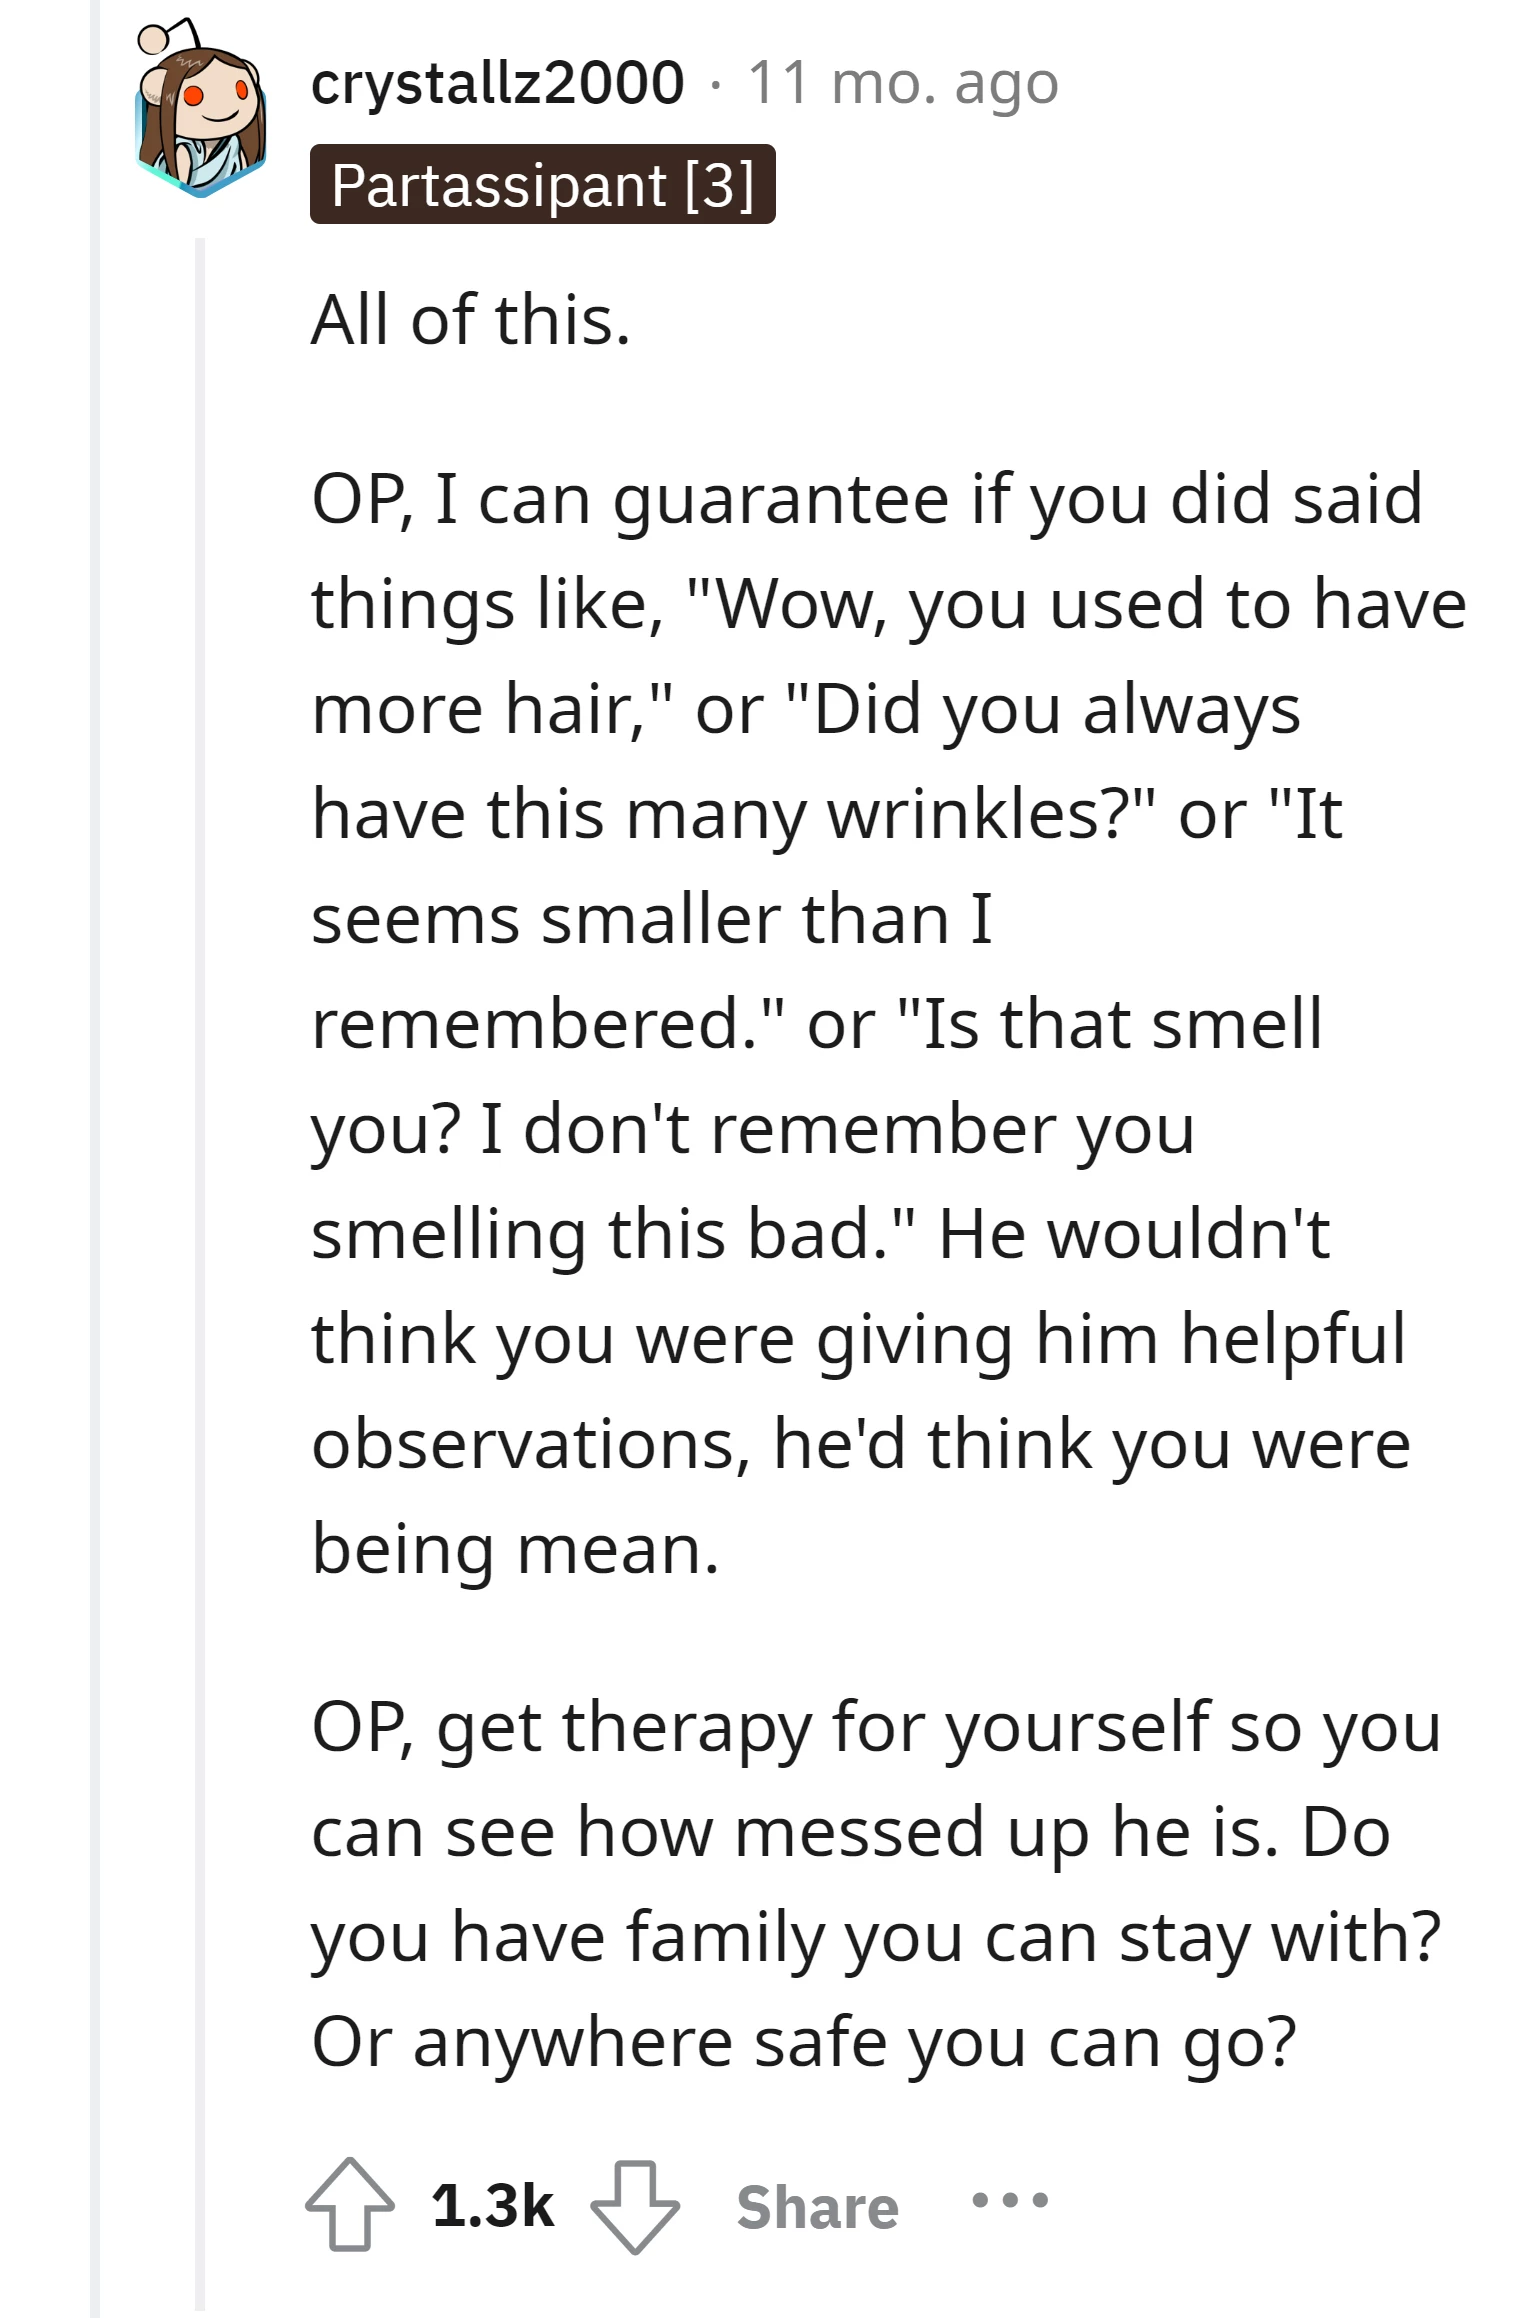 This person advises OP to seek therapy for self-awareness and suggest finding a safe place,